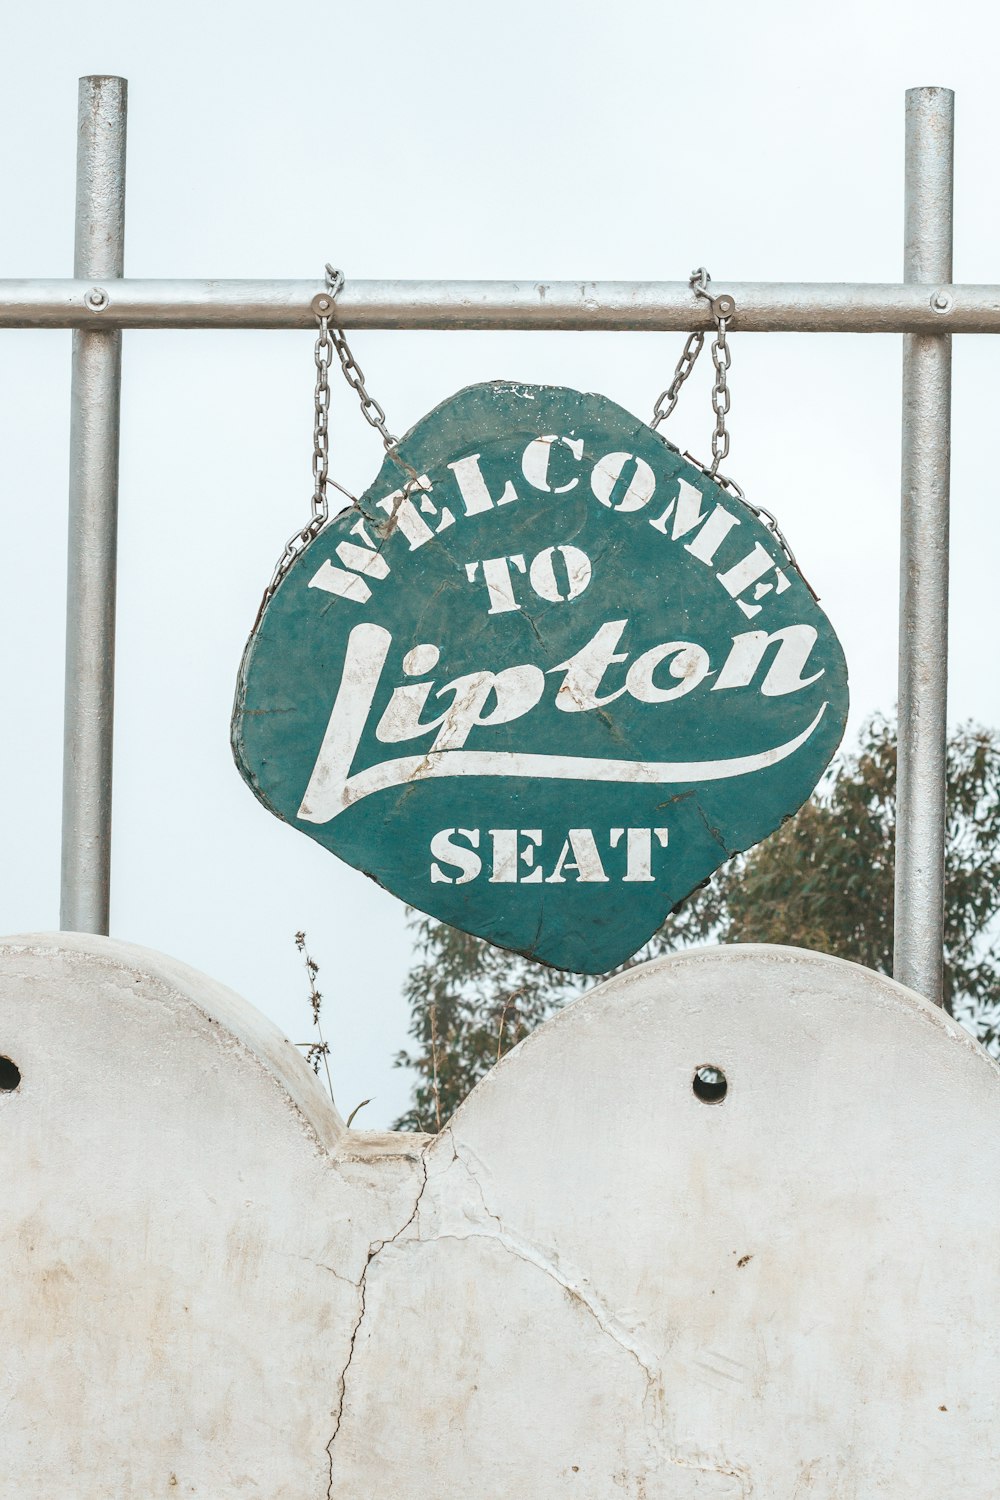 a sign that says welcome to lipton seat